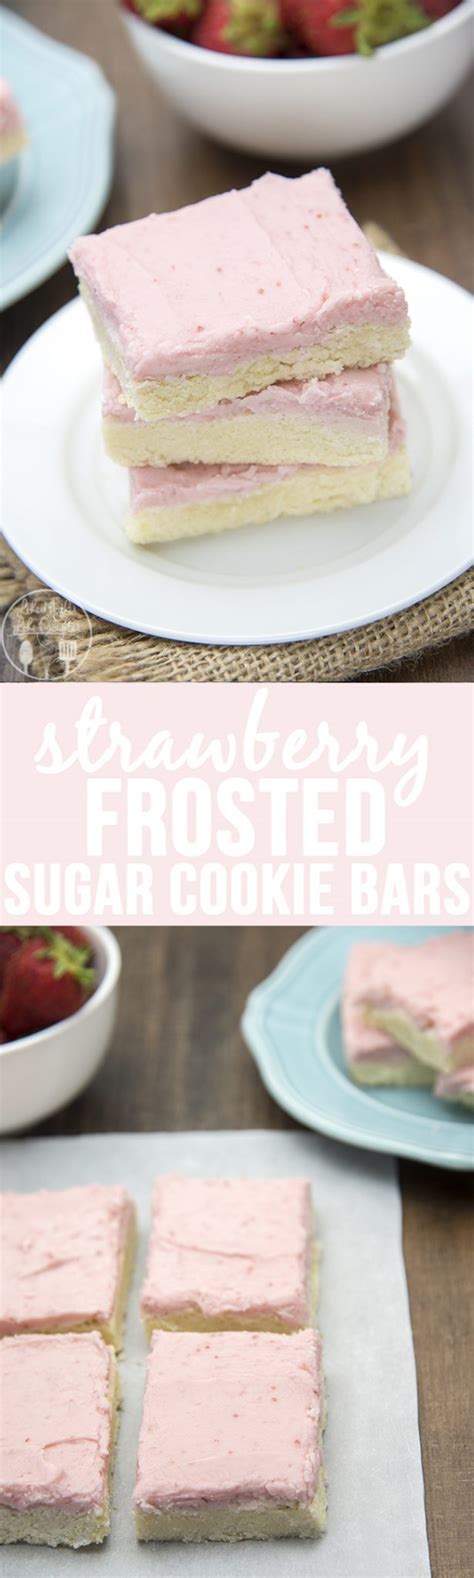 Strawberry Frosted Sugar Cookie Bars Lmldfood